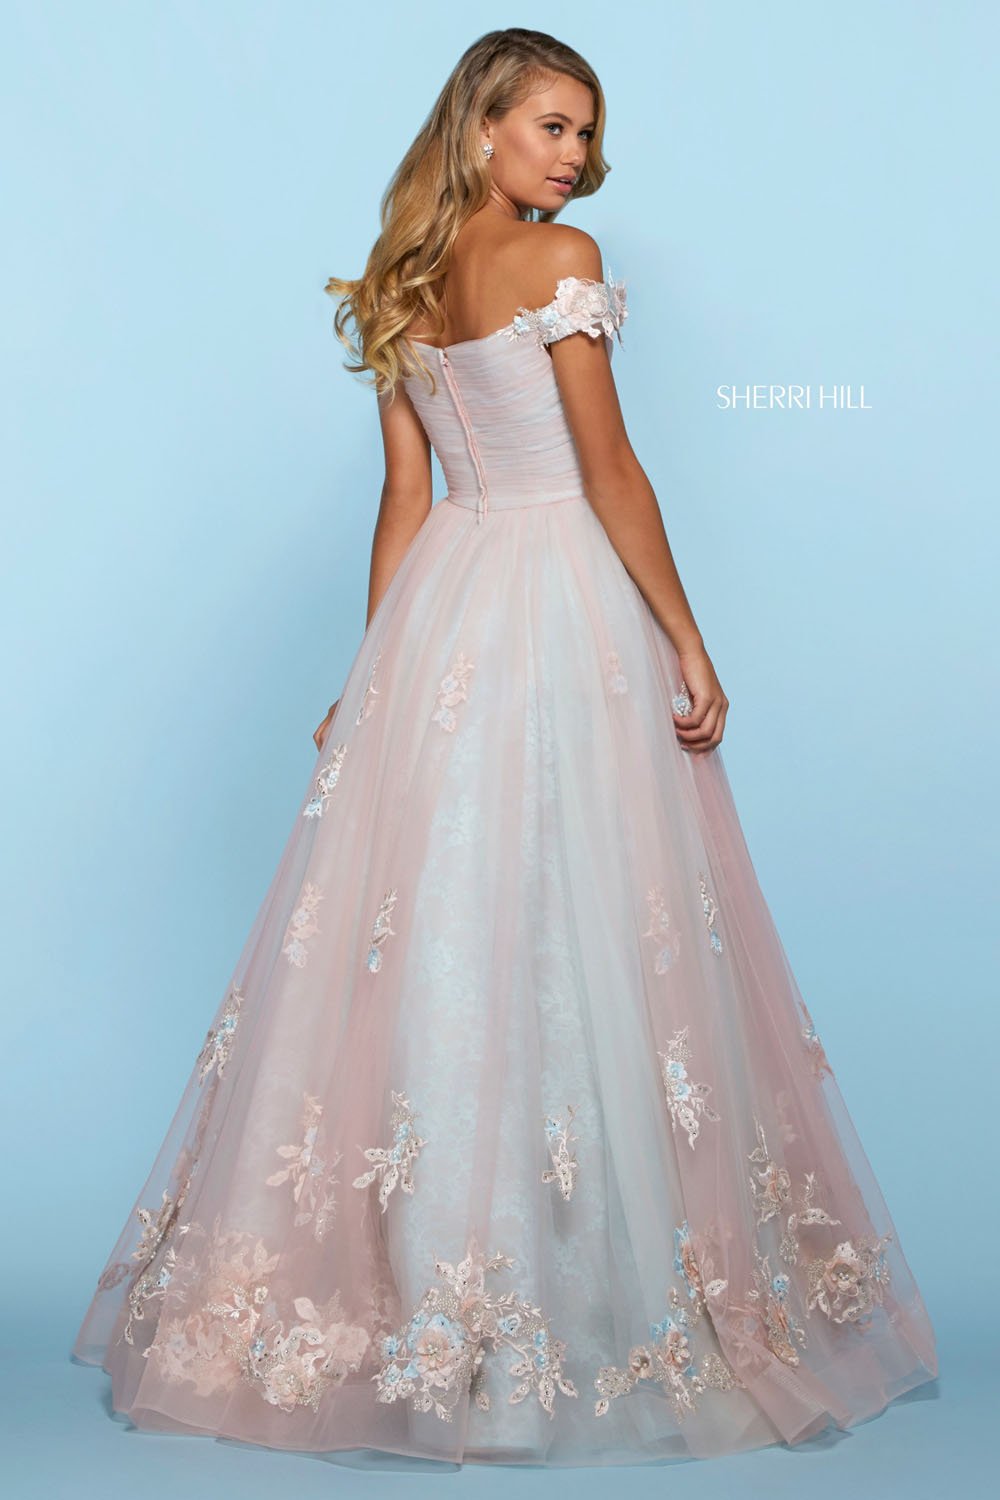 Sherri Hill 53587 dress images in these colors: Aqua Peach, Ivory Pink, Ivory Light Blue, Ivory Light Yellow.